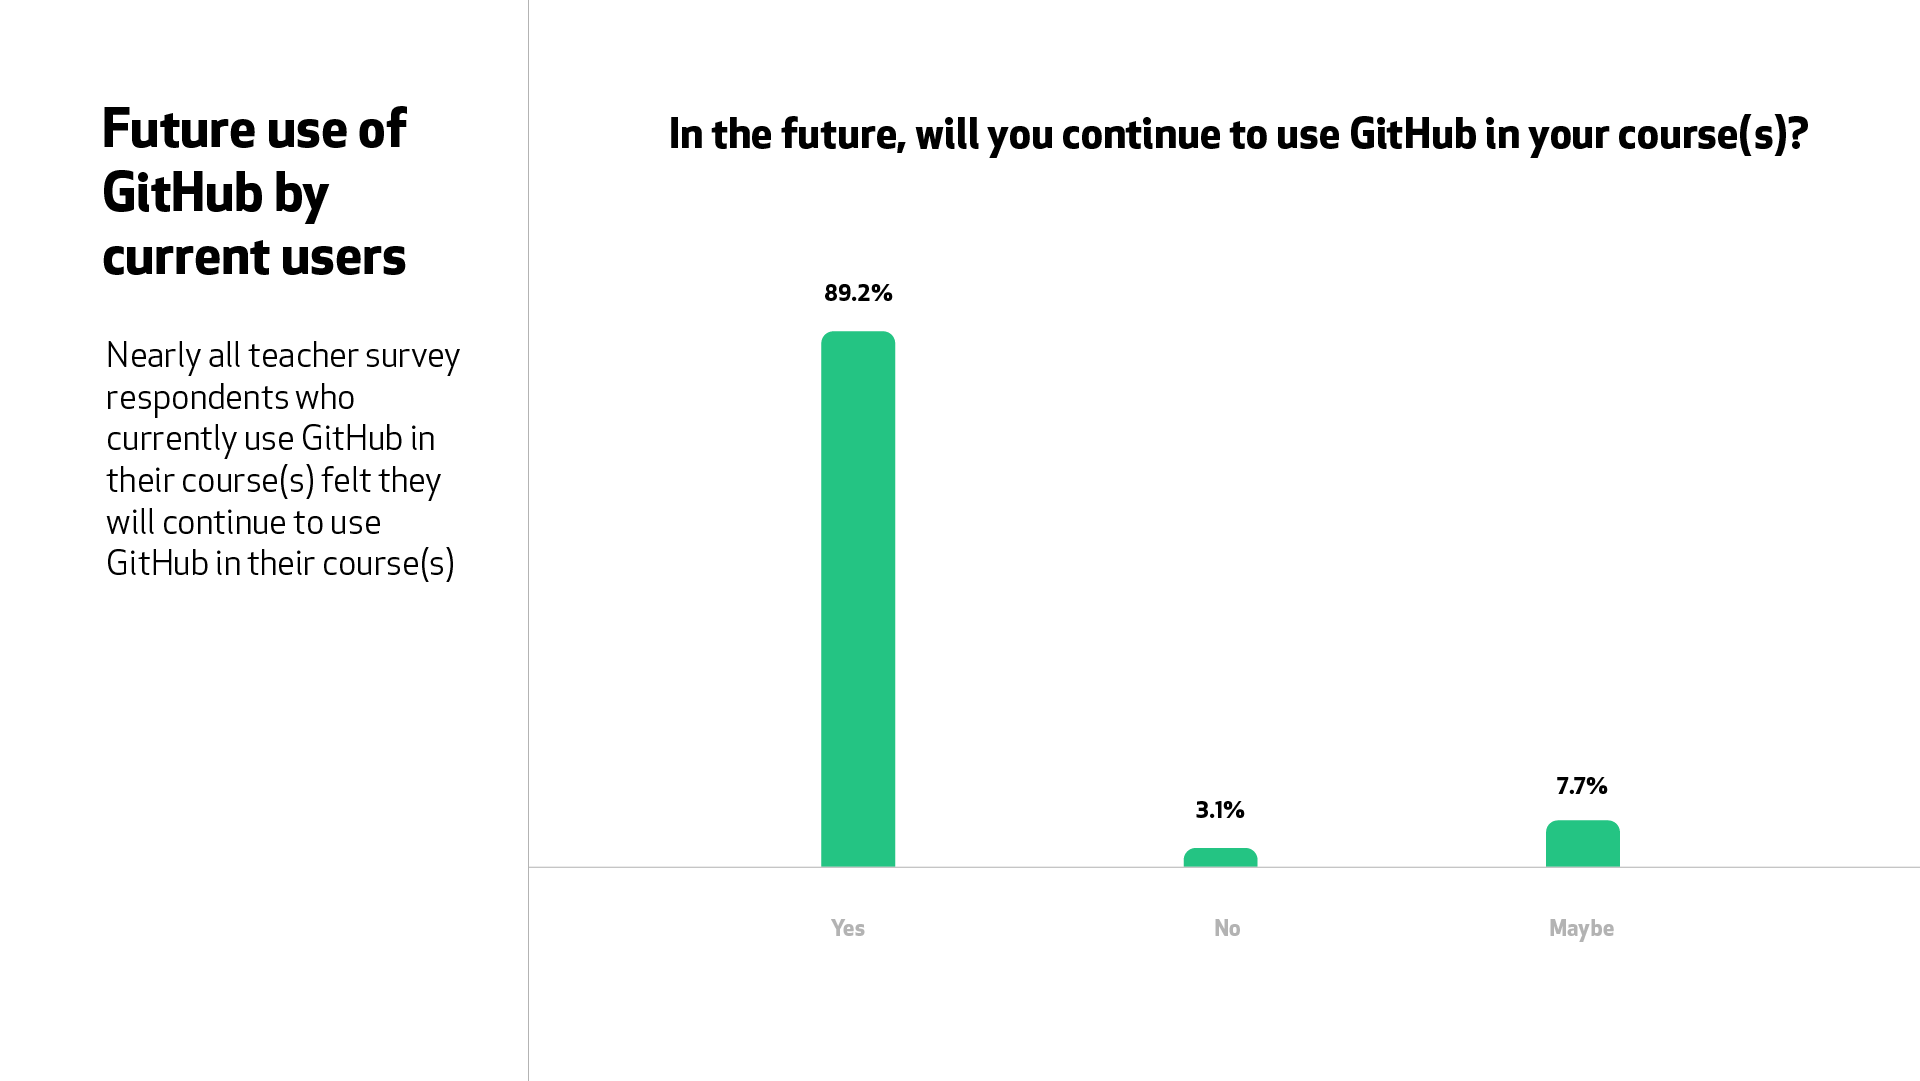 A graph for the question, “In the future, will you continue to use GitHub in your courses?” 89.2% of teachers said “yes”.